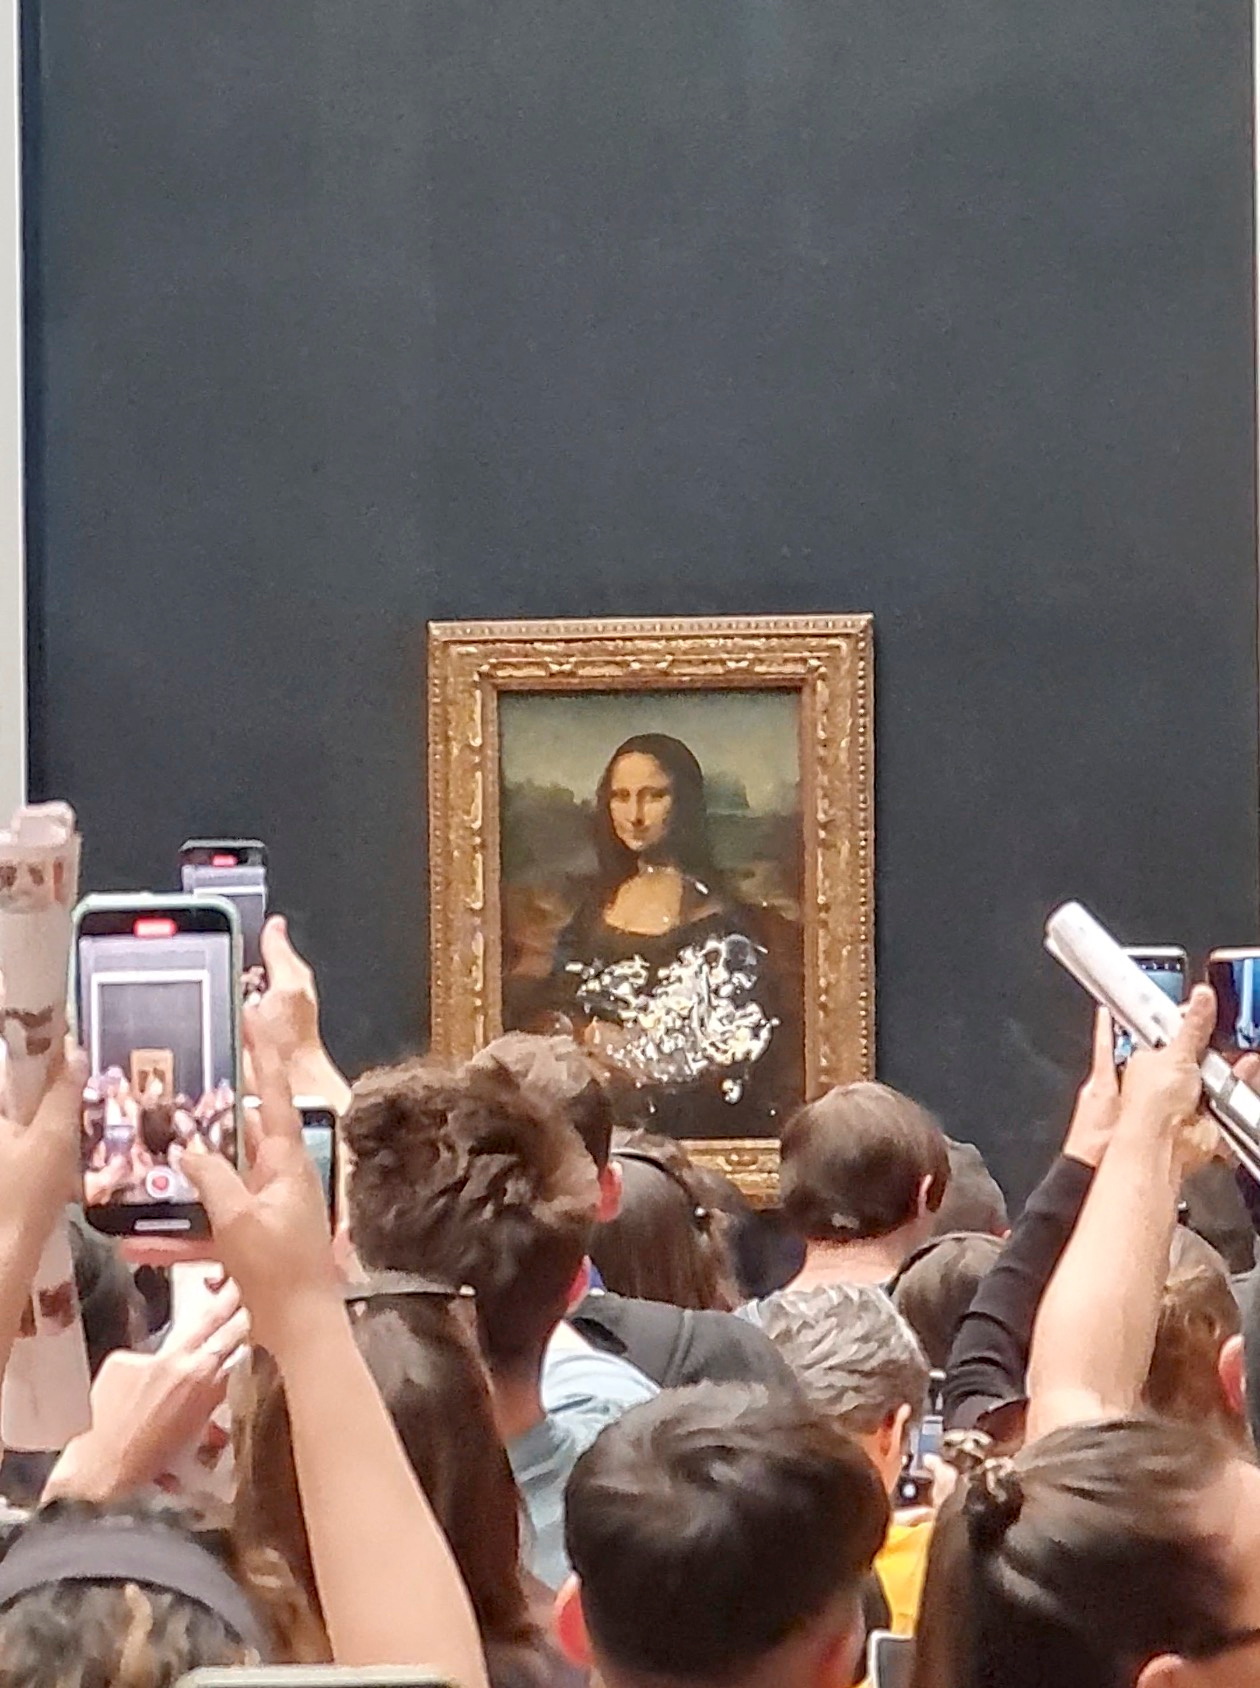 Visitors take a pictures and video of the painting "Mona Lisa" after cake was smeared on the protective glass at the Lourve Museum in Paris